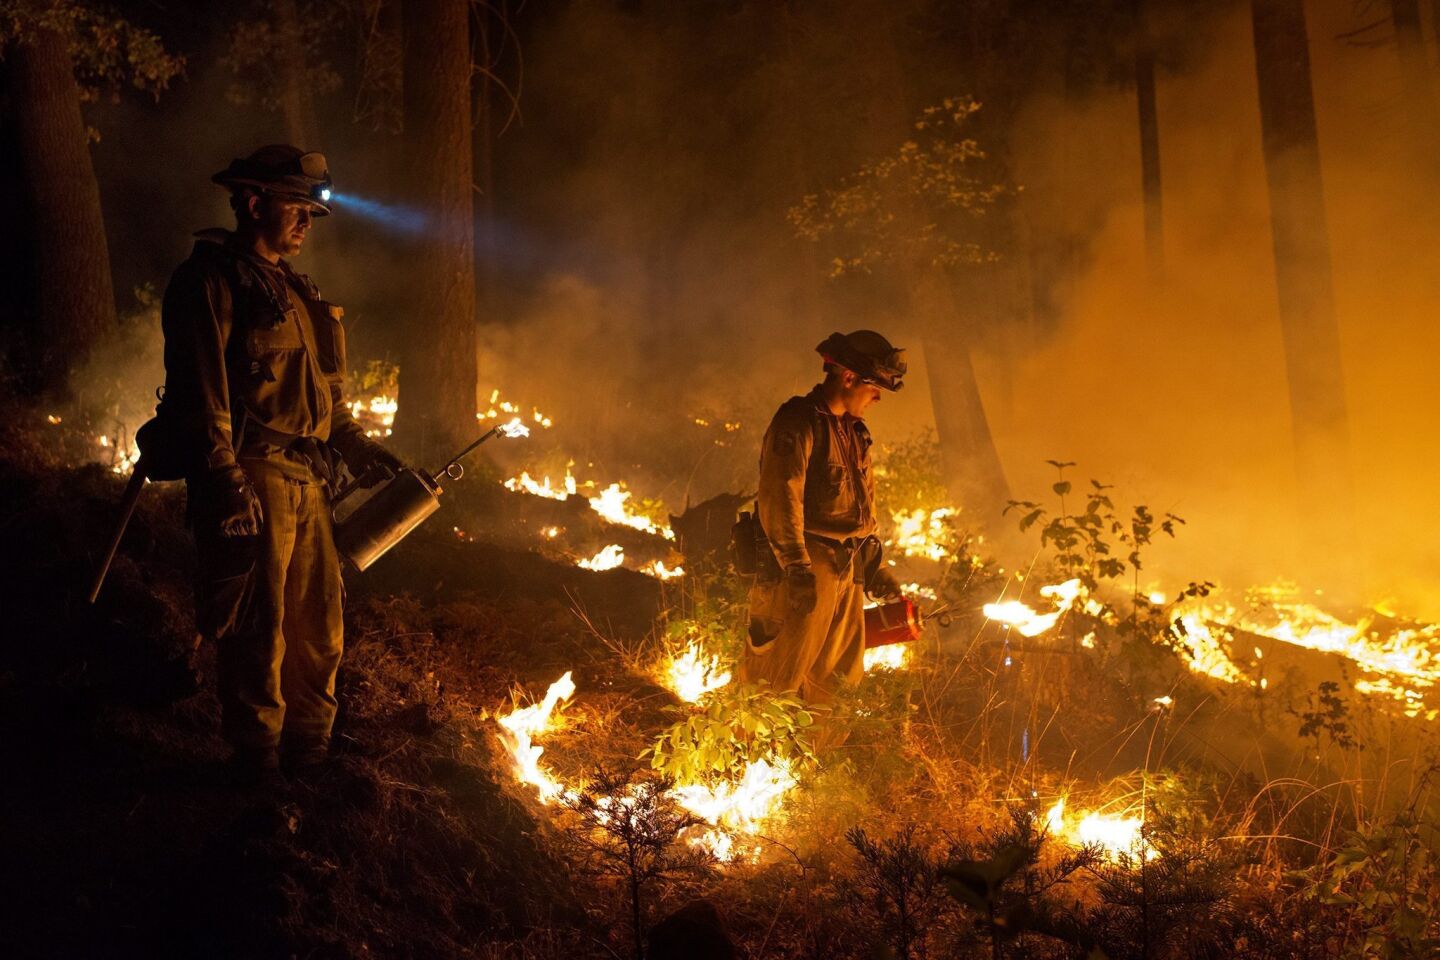 Firefighters use drip torches to set a controlled burn to create a safe zone around homes close to the King fire near Pollock Pines, Calif.